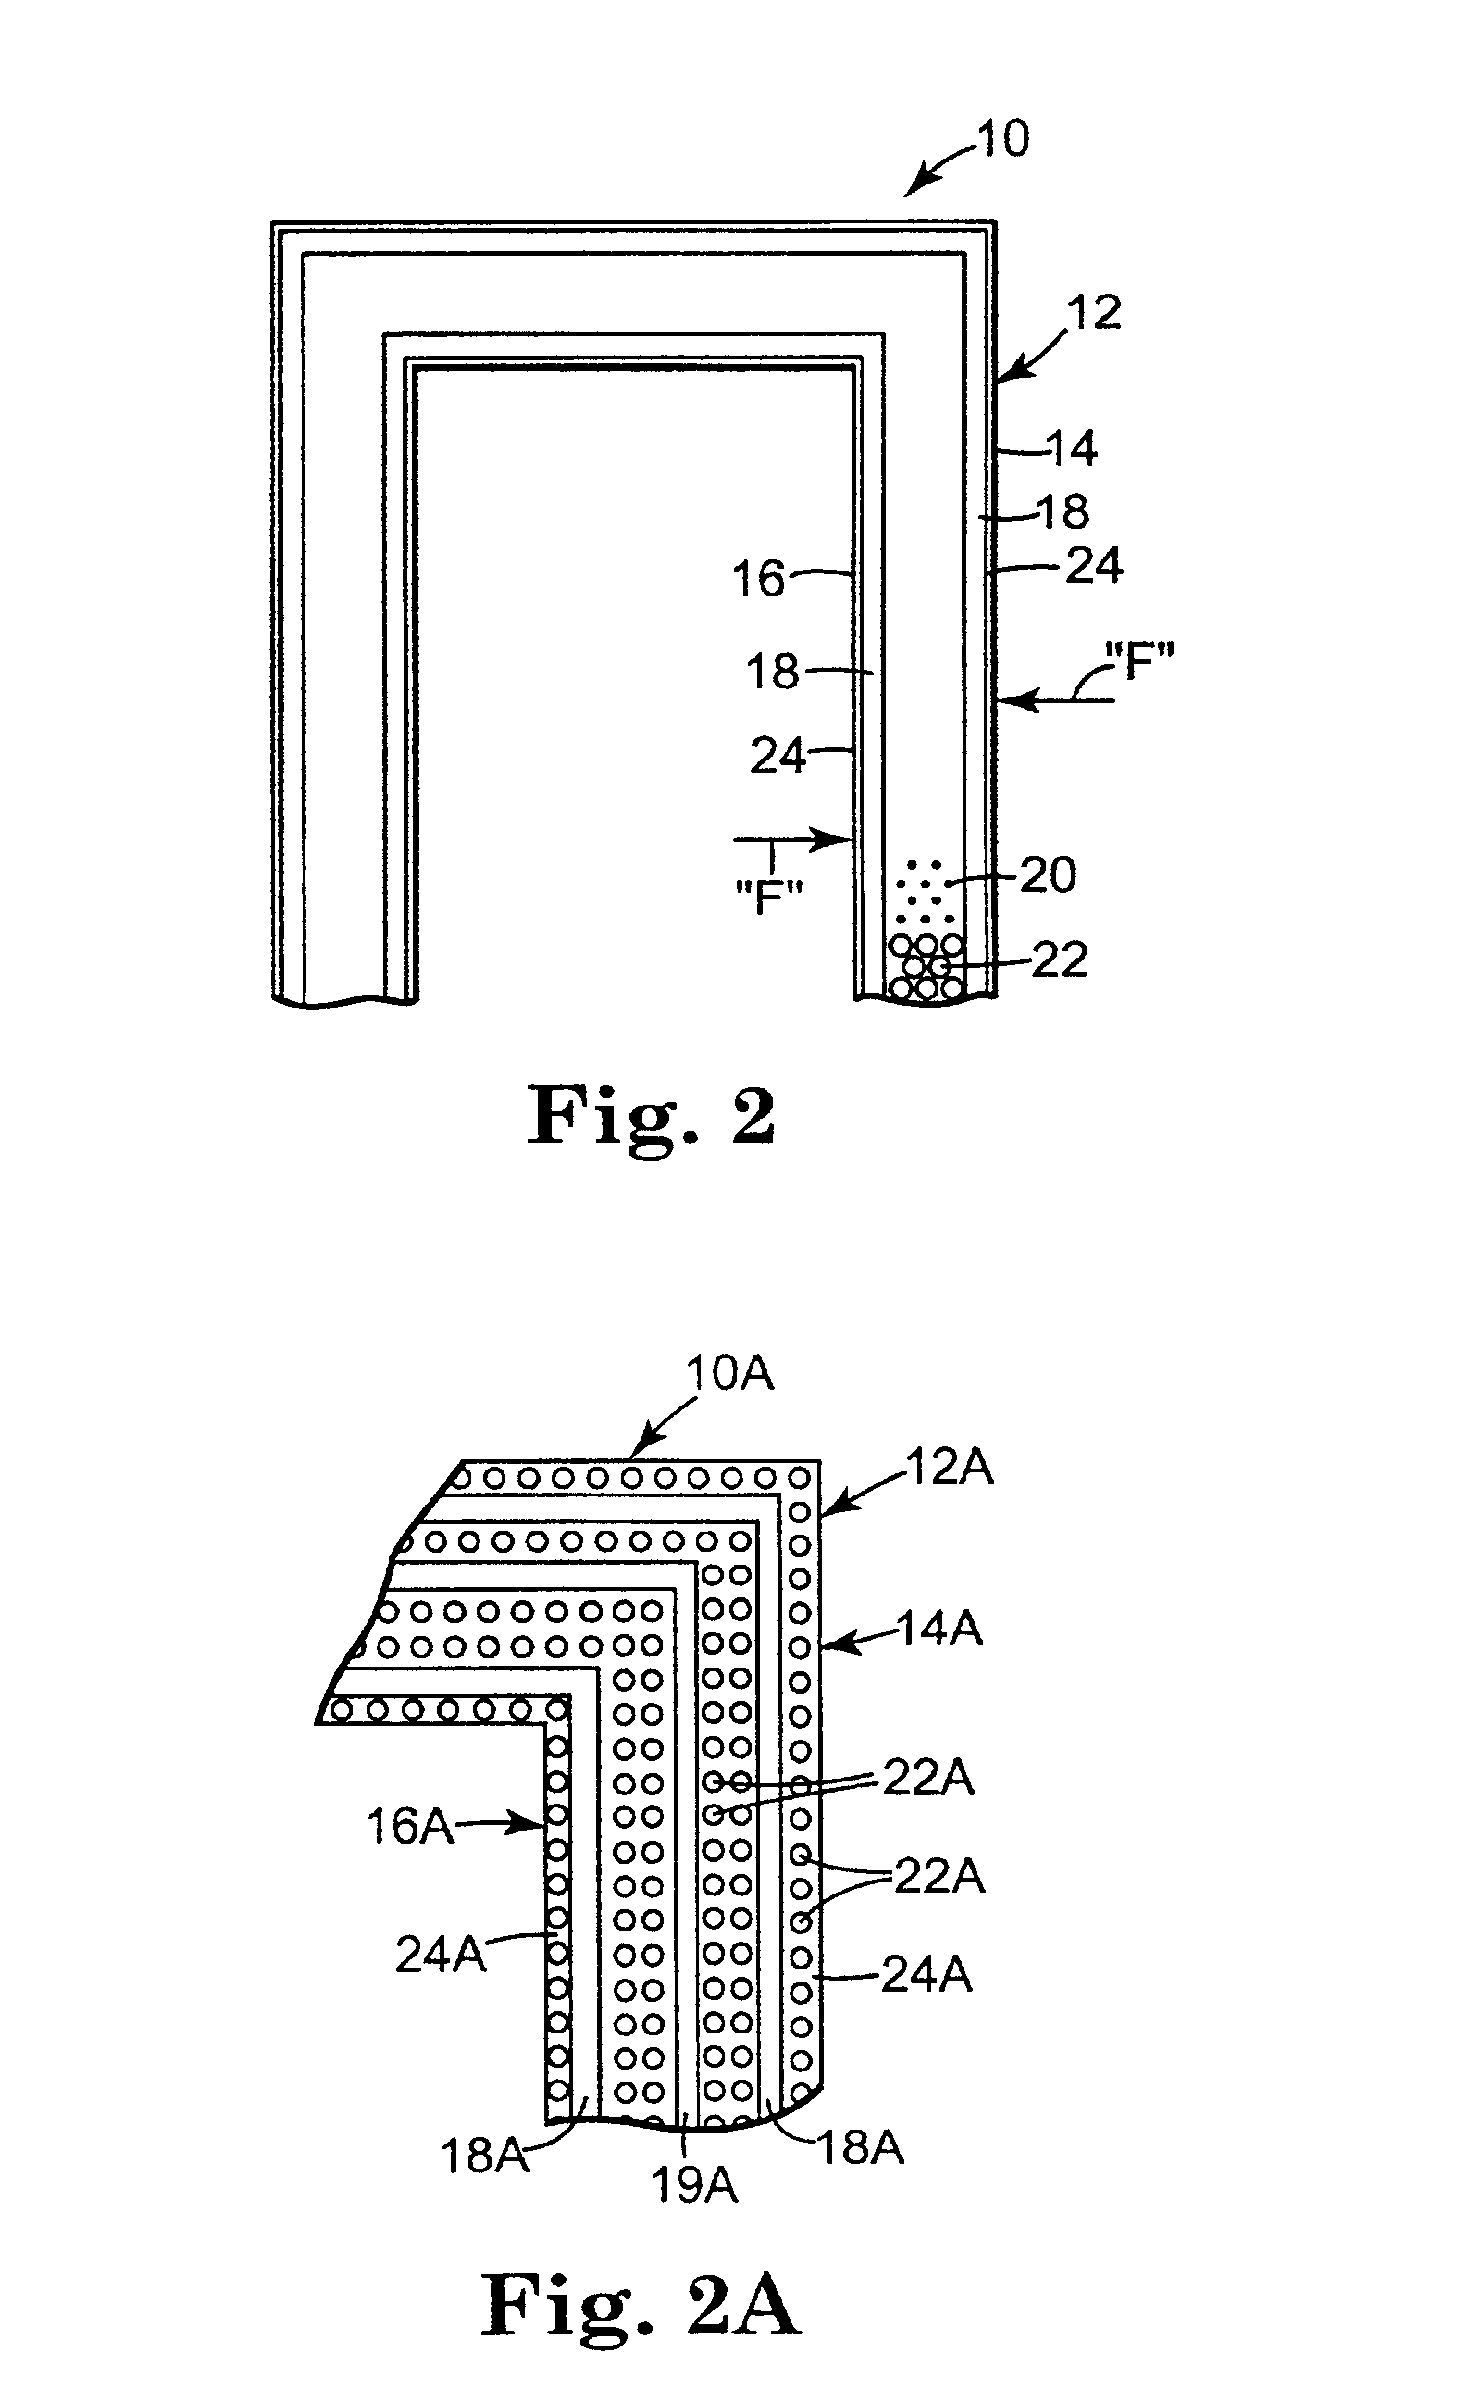 Method of making a pultruded part with a reinforcing mat